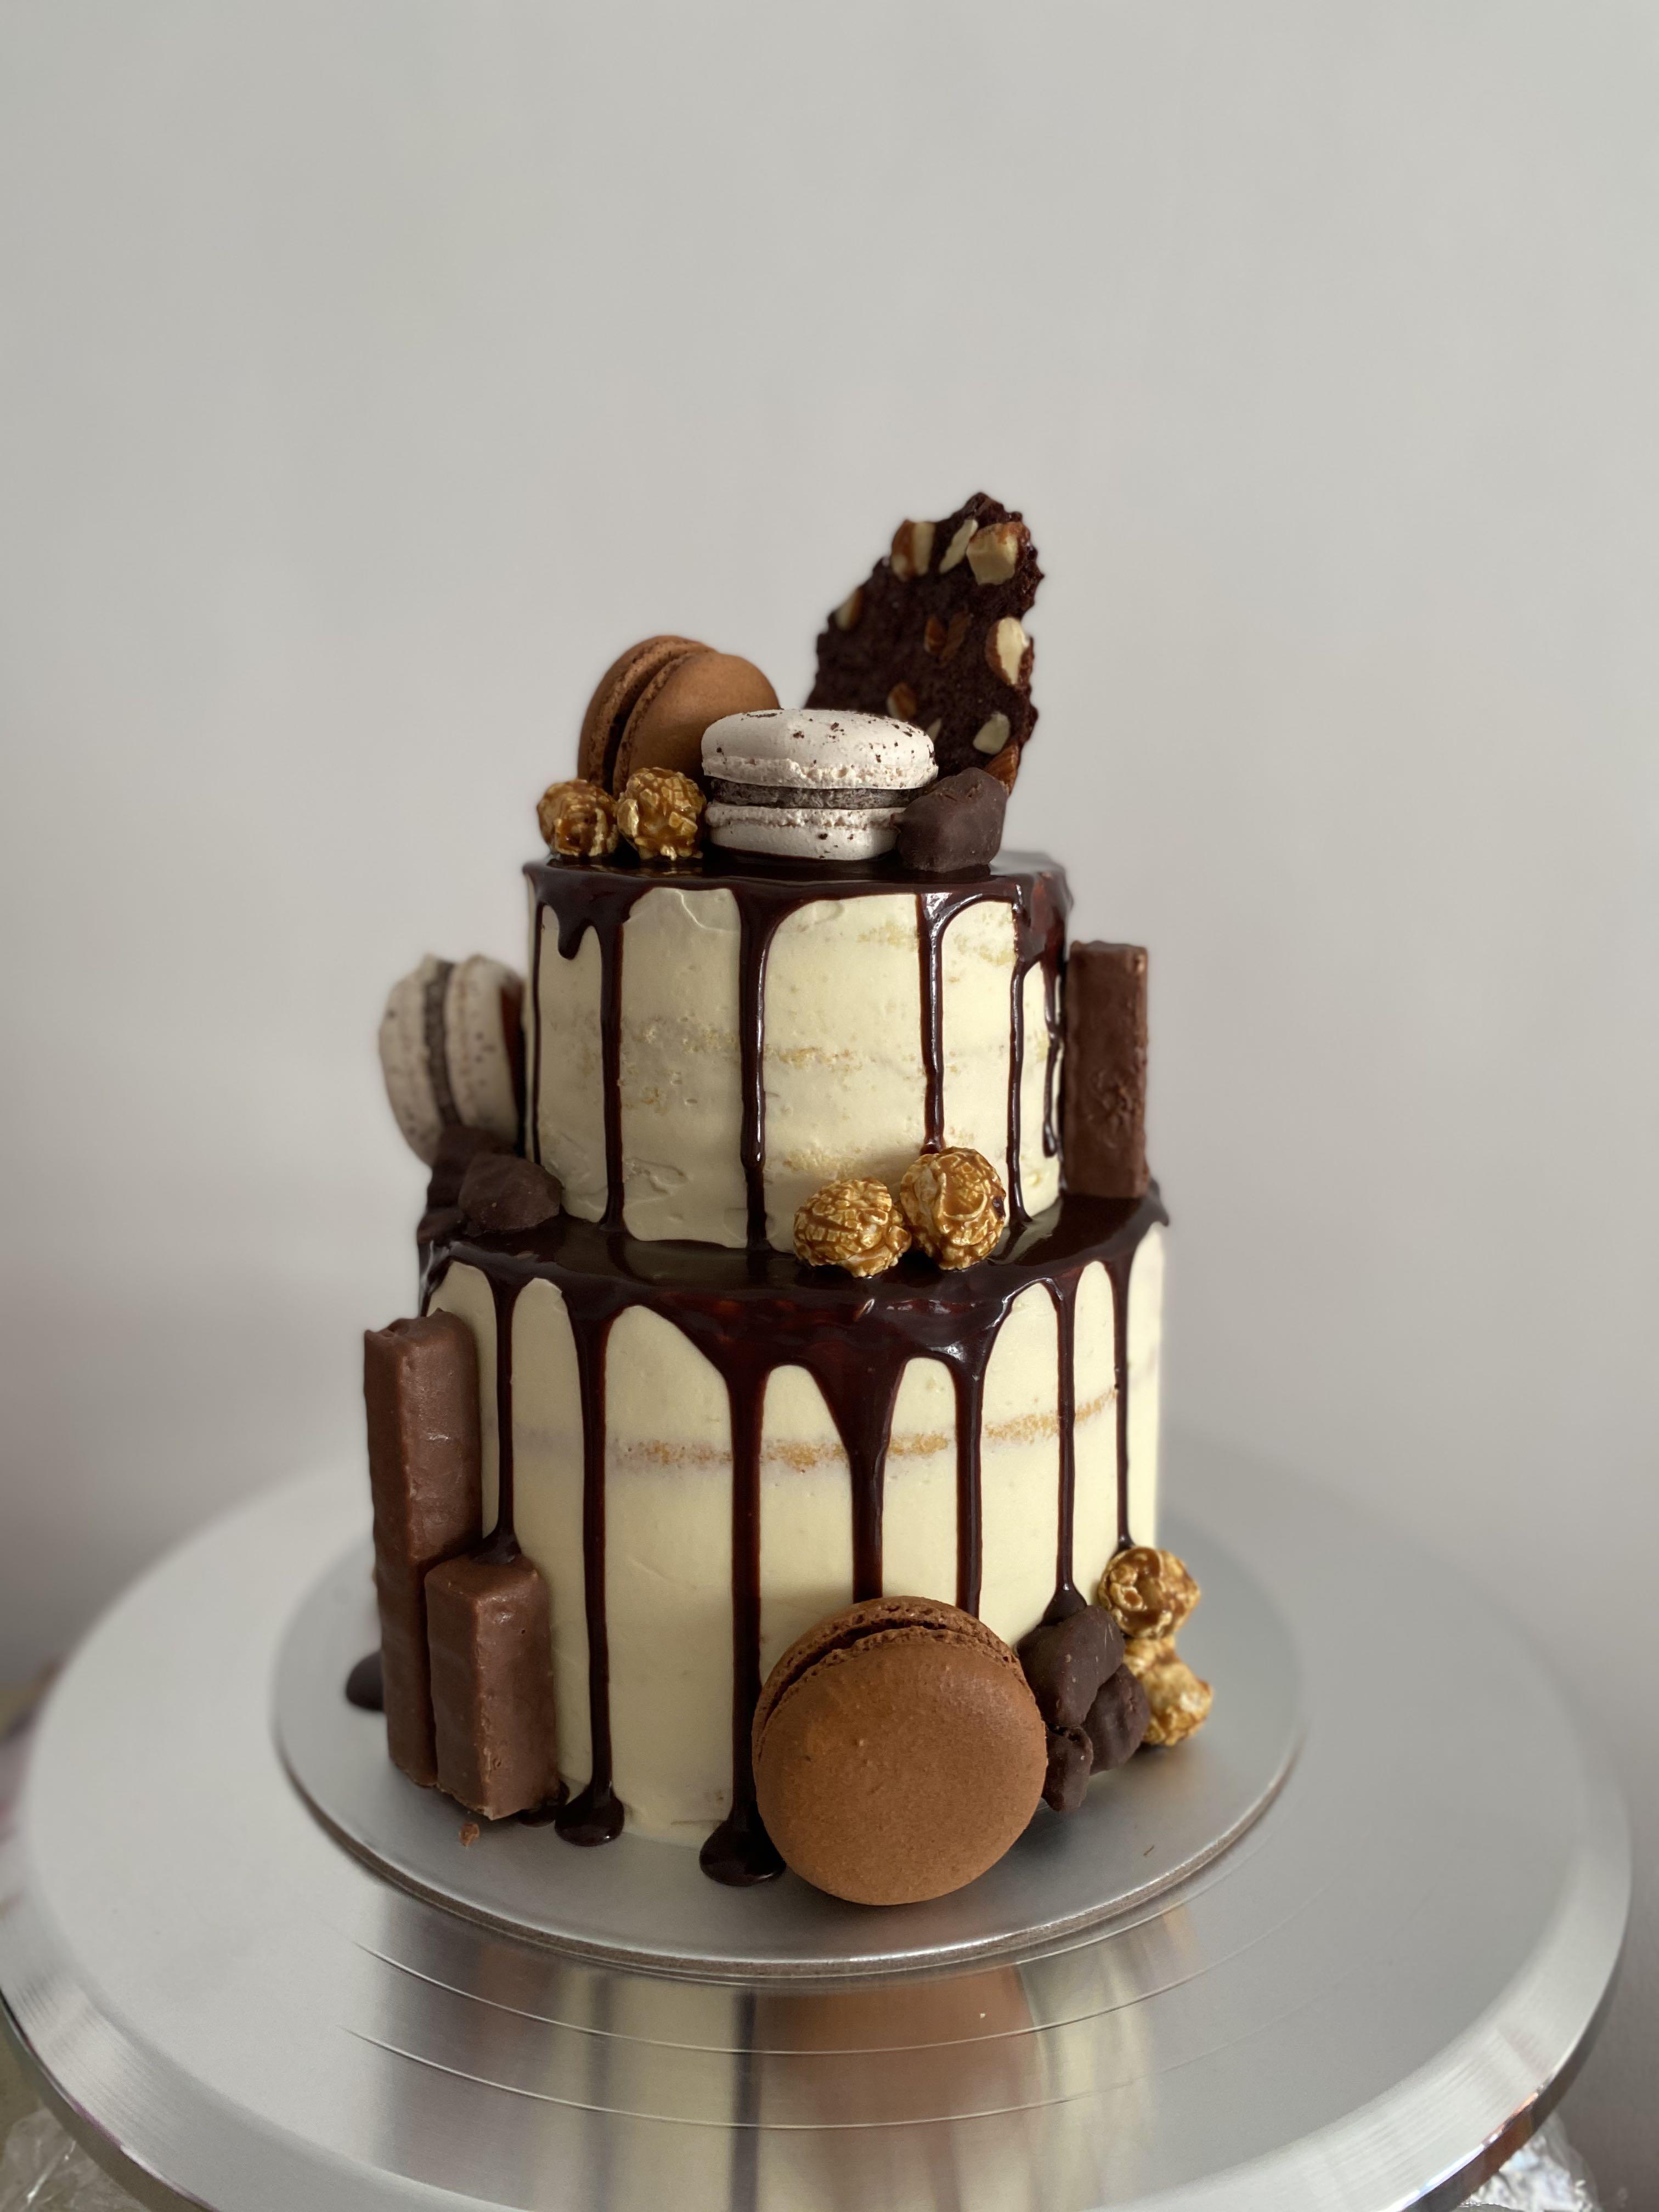 How to make your own 3 Tier Chocolate Wedding Cake - Sunday Baking